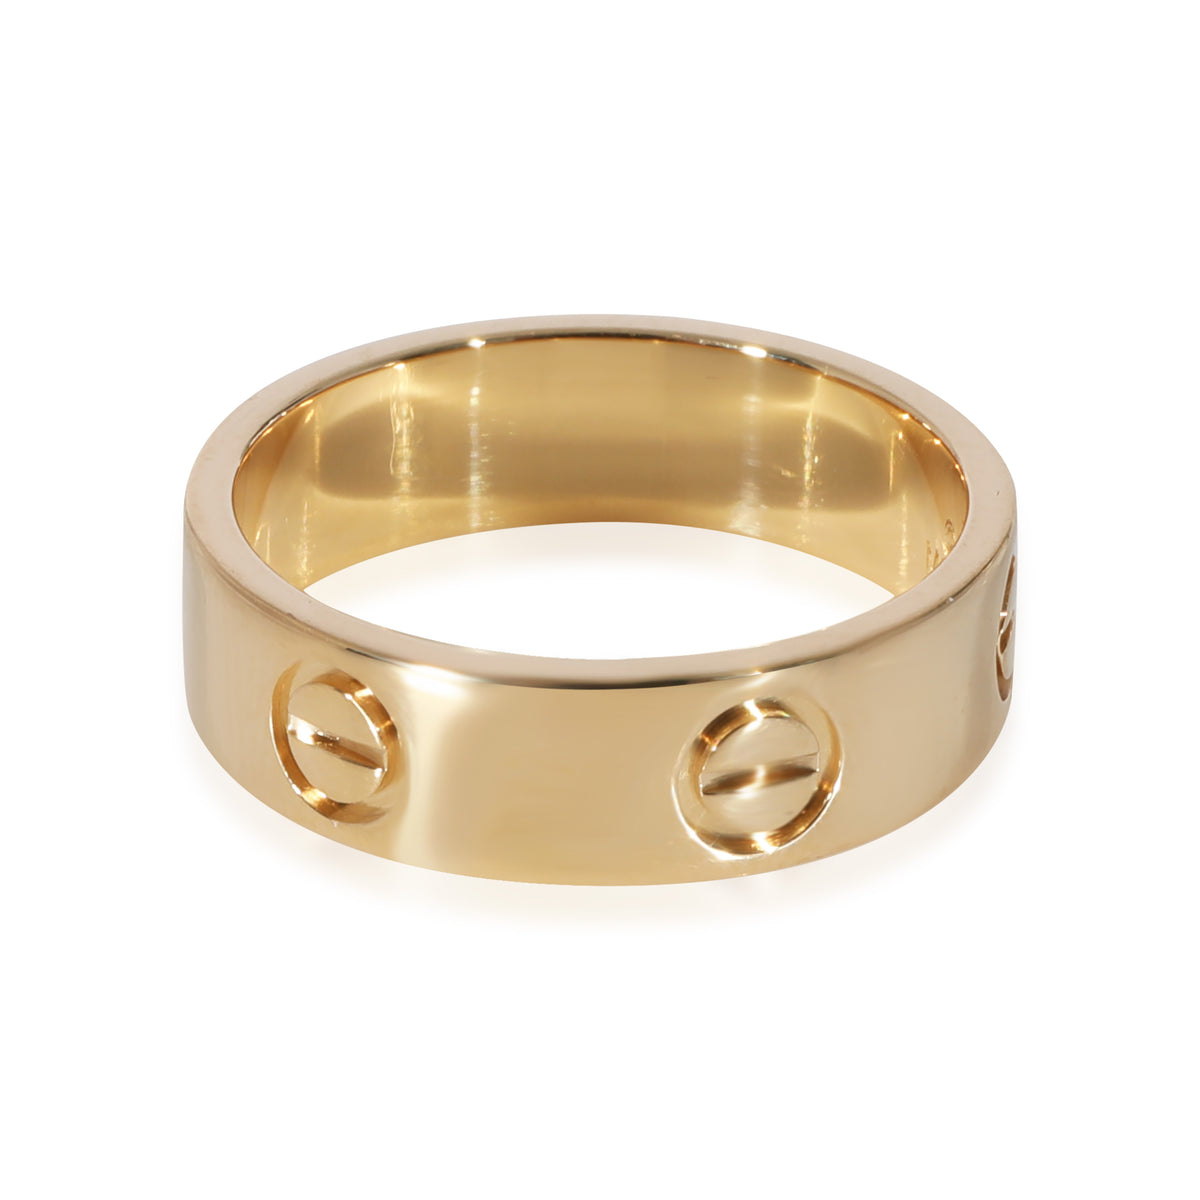 Cartier Love Ring in 18KT Yellow Gold